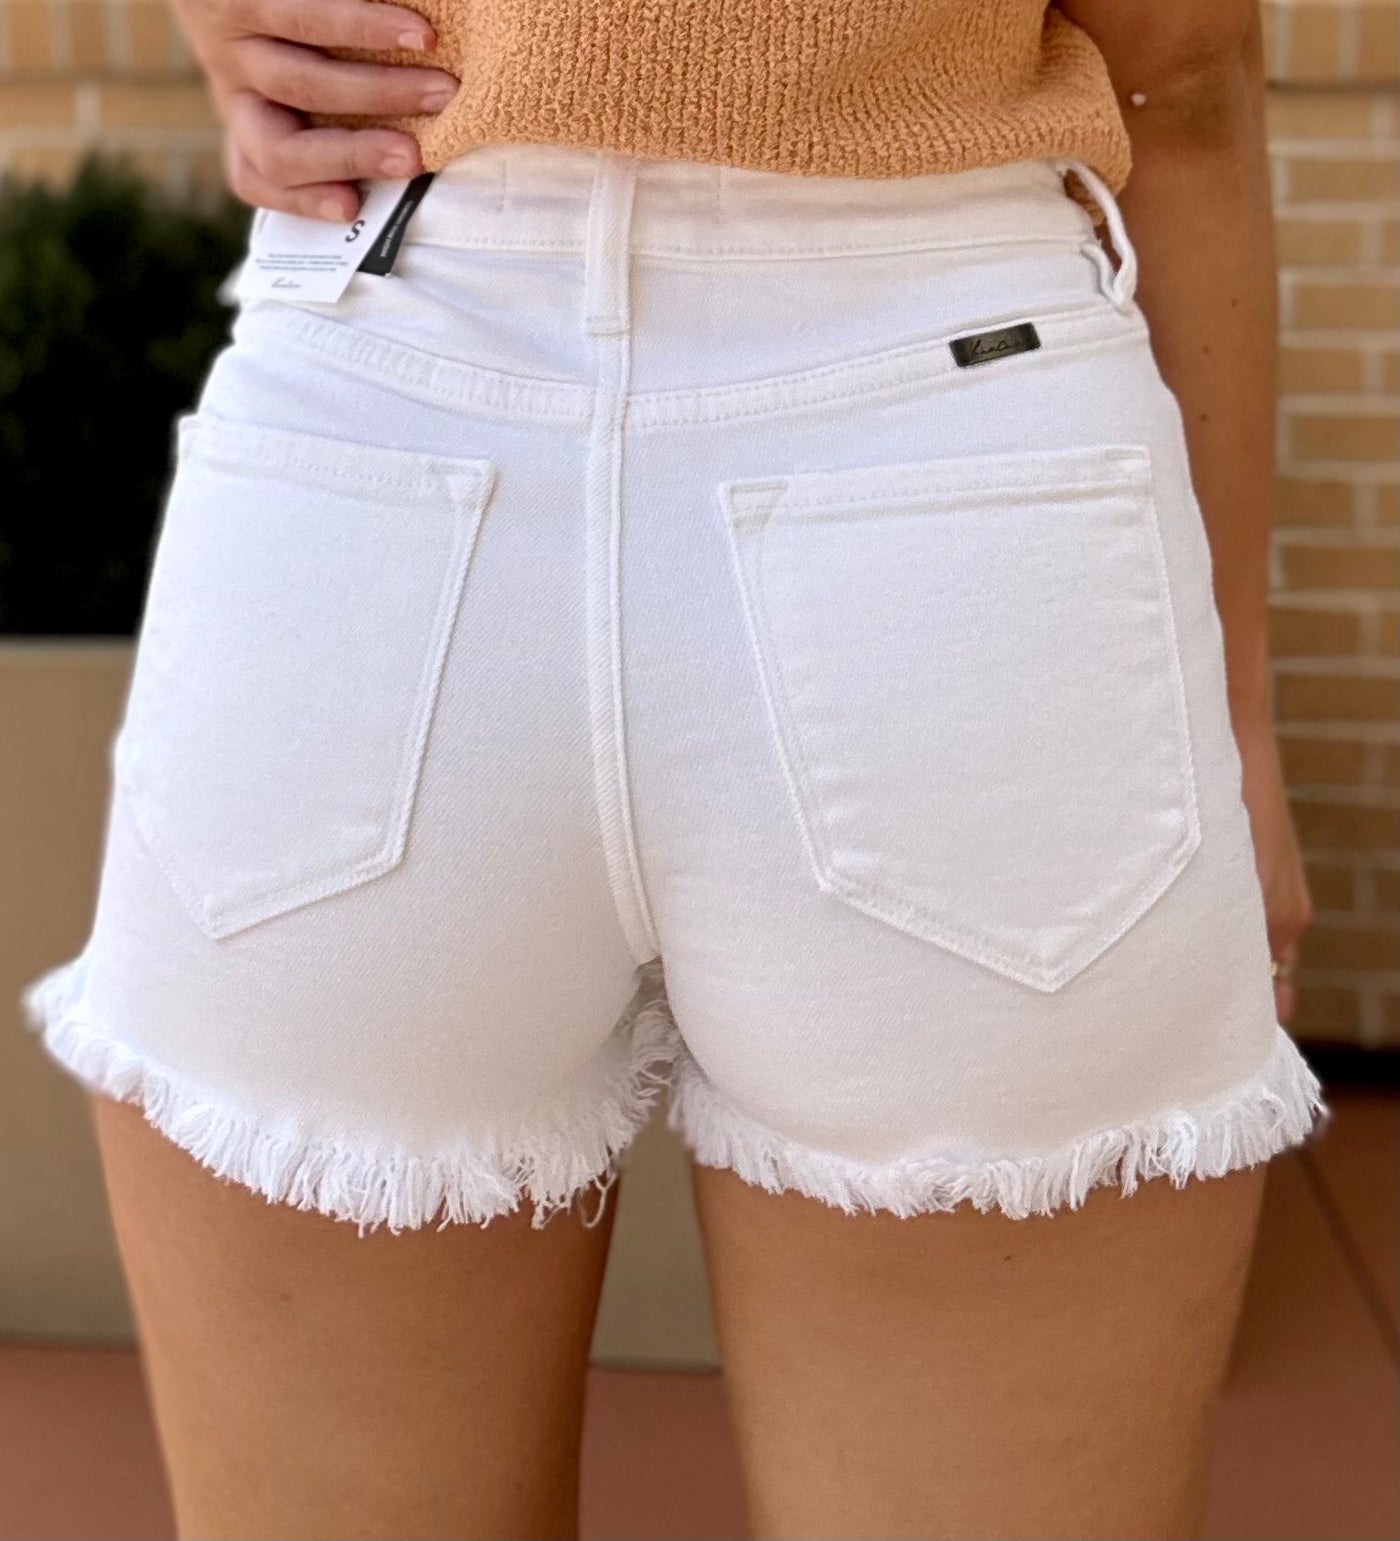 BACK VIEW OF SHORTS